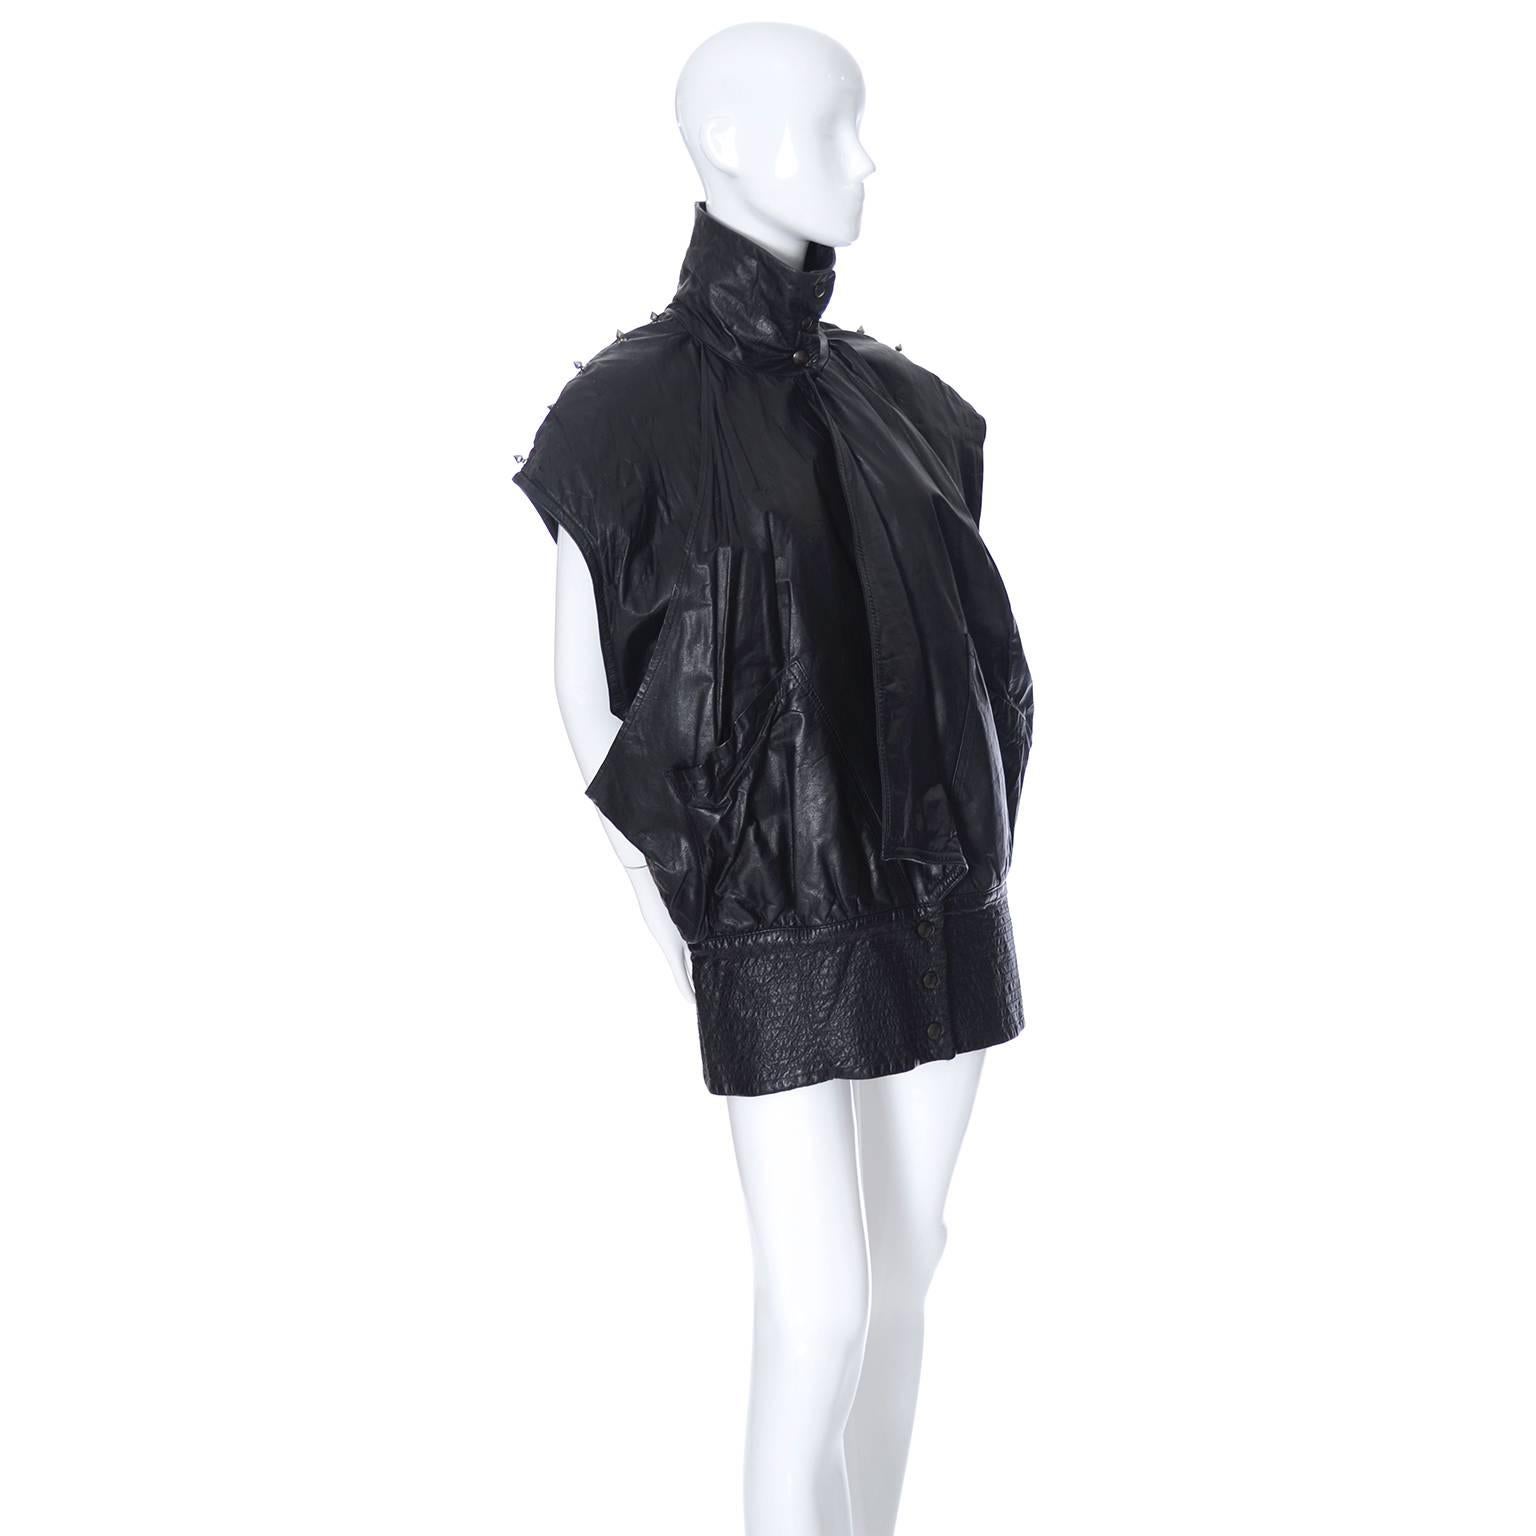 This vintage black sleeveless leather coat, or vintage jacket vest is from Gamma Los Angeles.  This comes from the estate of a fashion lover who had incredible style. Her clothing included many important Japanese designers and the best 1980's